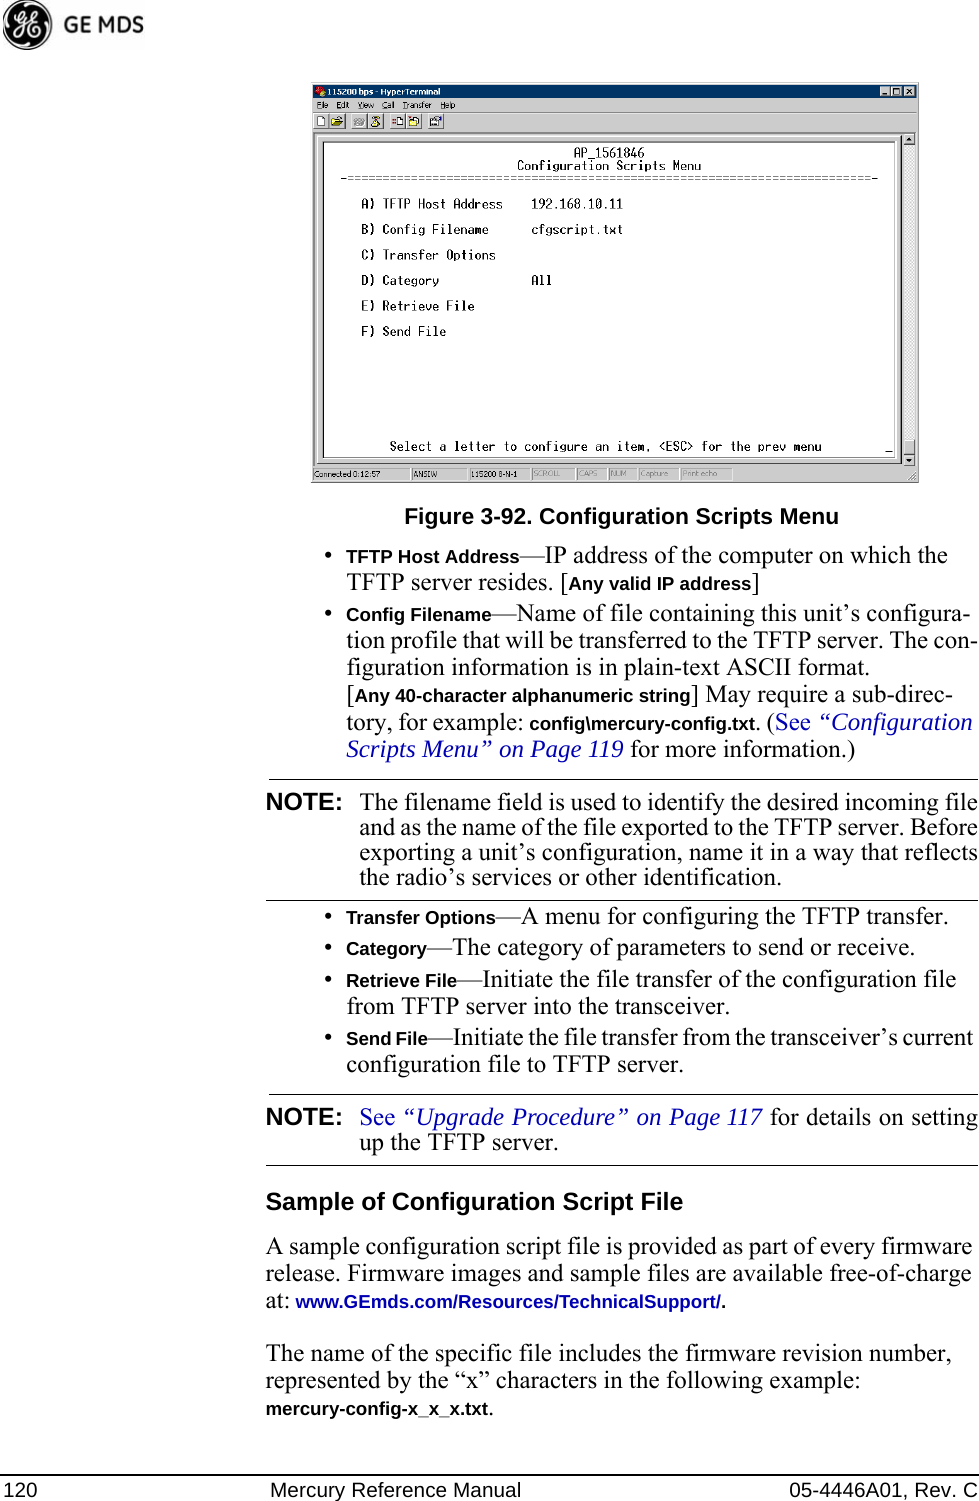 120 Mercury Reference Manual 05-4446A01, Rev. CInvisible place holderFigure 3-92. Configuration Scripts Menu•TFTP Host Address—IP address of the computer on which the TFTP server resides. [Any valid IP address]•Config Filename—Name of file containing this unit’s configura-tion profile that will be transferred to the TFTP server. The con-figuration information is in plain-text ASCII format.[Any 40-character alphanumeric string] May require a sub-direc-tory, for example: config\mercury-config.txt. (See “Configuration Scripts Menu” on Page 119 for more information.)NOTE: The filename field is used to identify the desired incoming fileand as the name of the file exported to the TFTP server. Beforeexporting a unit’s configuration, name it in a way that reflectsthe radio’s services or other identification.•Transfer Options—A menu for configuring the TFTP transfer.•Category—The category of parameters to send or receive.•Retrieve File—Initiate the file transfer of the configuration file from TFTP server into the transceiver.•Send File—Initiate the file transfer from the transceiver’s current configuration file to TFTP server.NOTE: See “Upgrade Procedure” on Page 117 for details on settingup the TFTP server.Sample of Configuration Script FileA sample configuration script file is provided as part of every firmware release. Firmware images and sample files are available free-of-charge at: www.GEmds.com/Resources/TechnicalSupport/.The name of the specific file includes the firmware revision number, represented by the “x” characters in the following example: mercury-config-x_x_x.txt. 